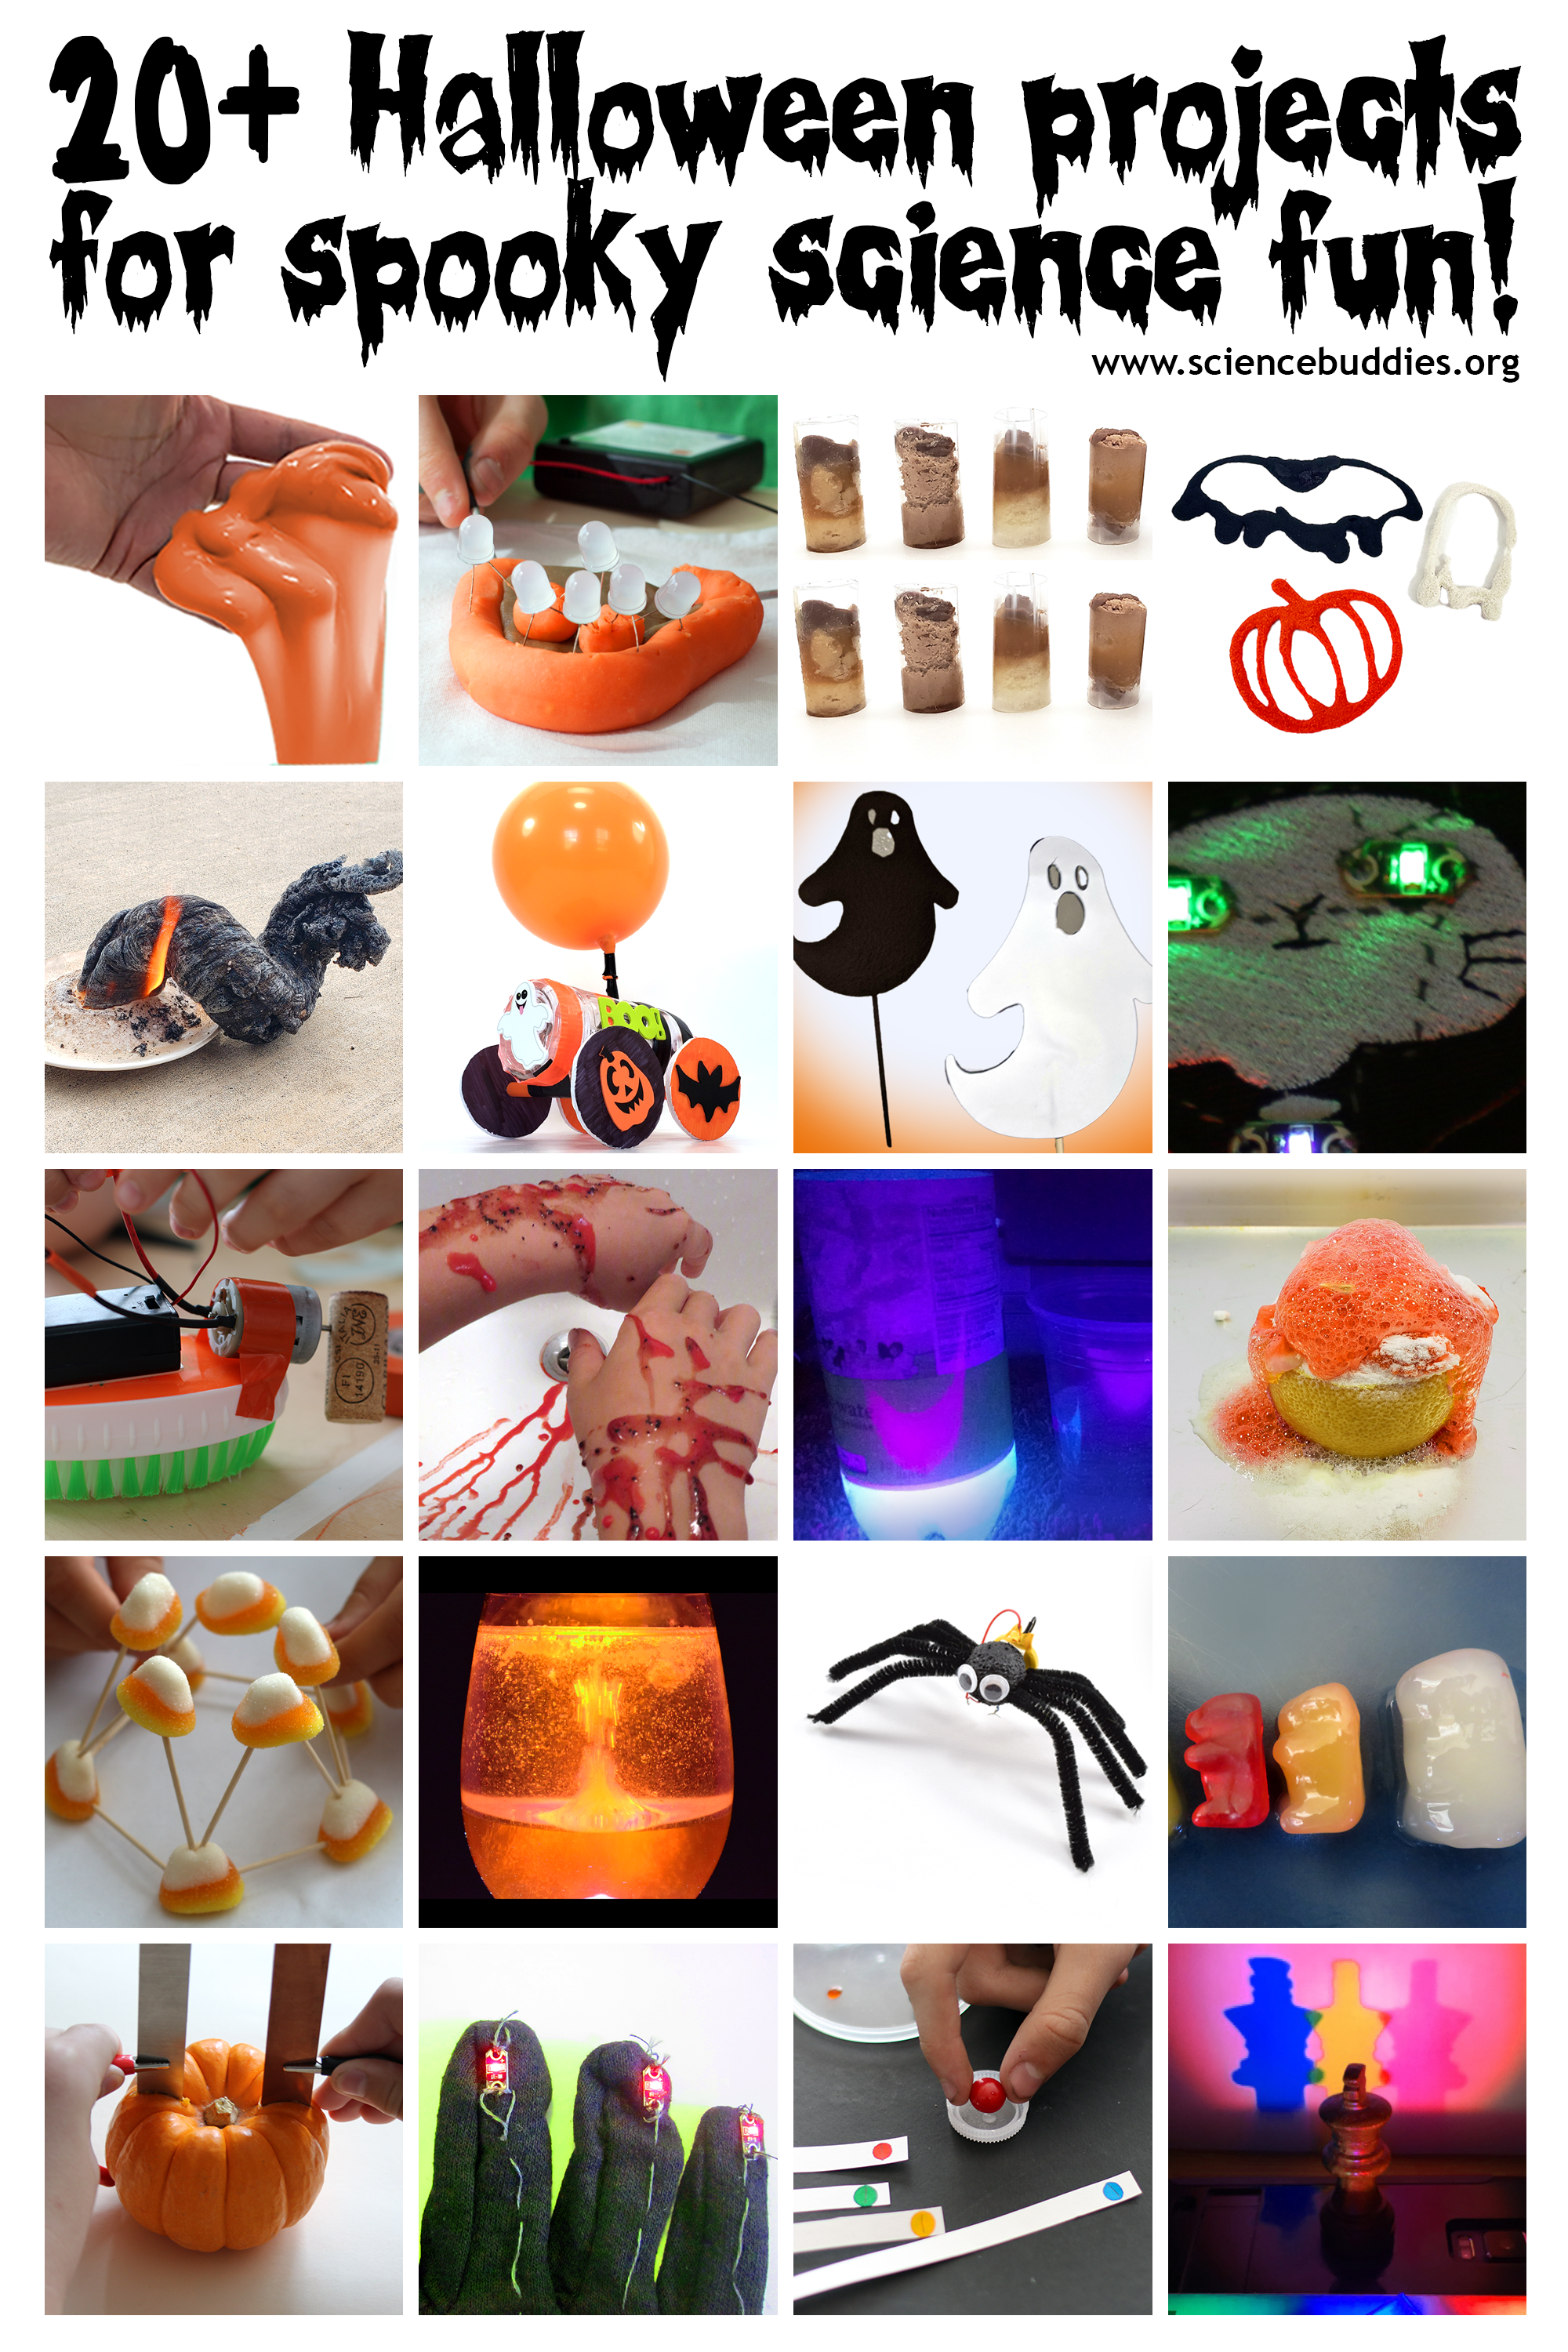 Examples from 20 different Halloween STEM activities and experiments for spooky science fun, including lava lamp, balloon car, pumpkin power, and more